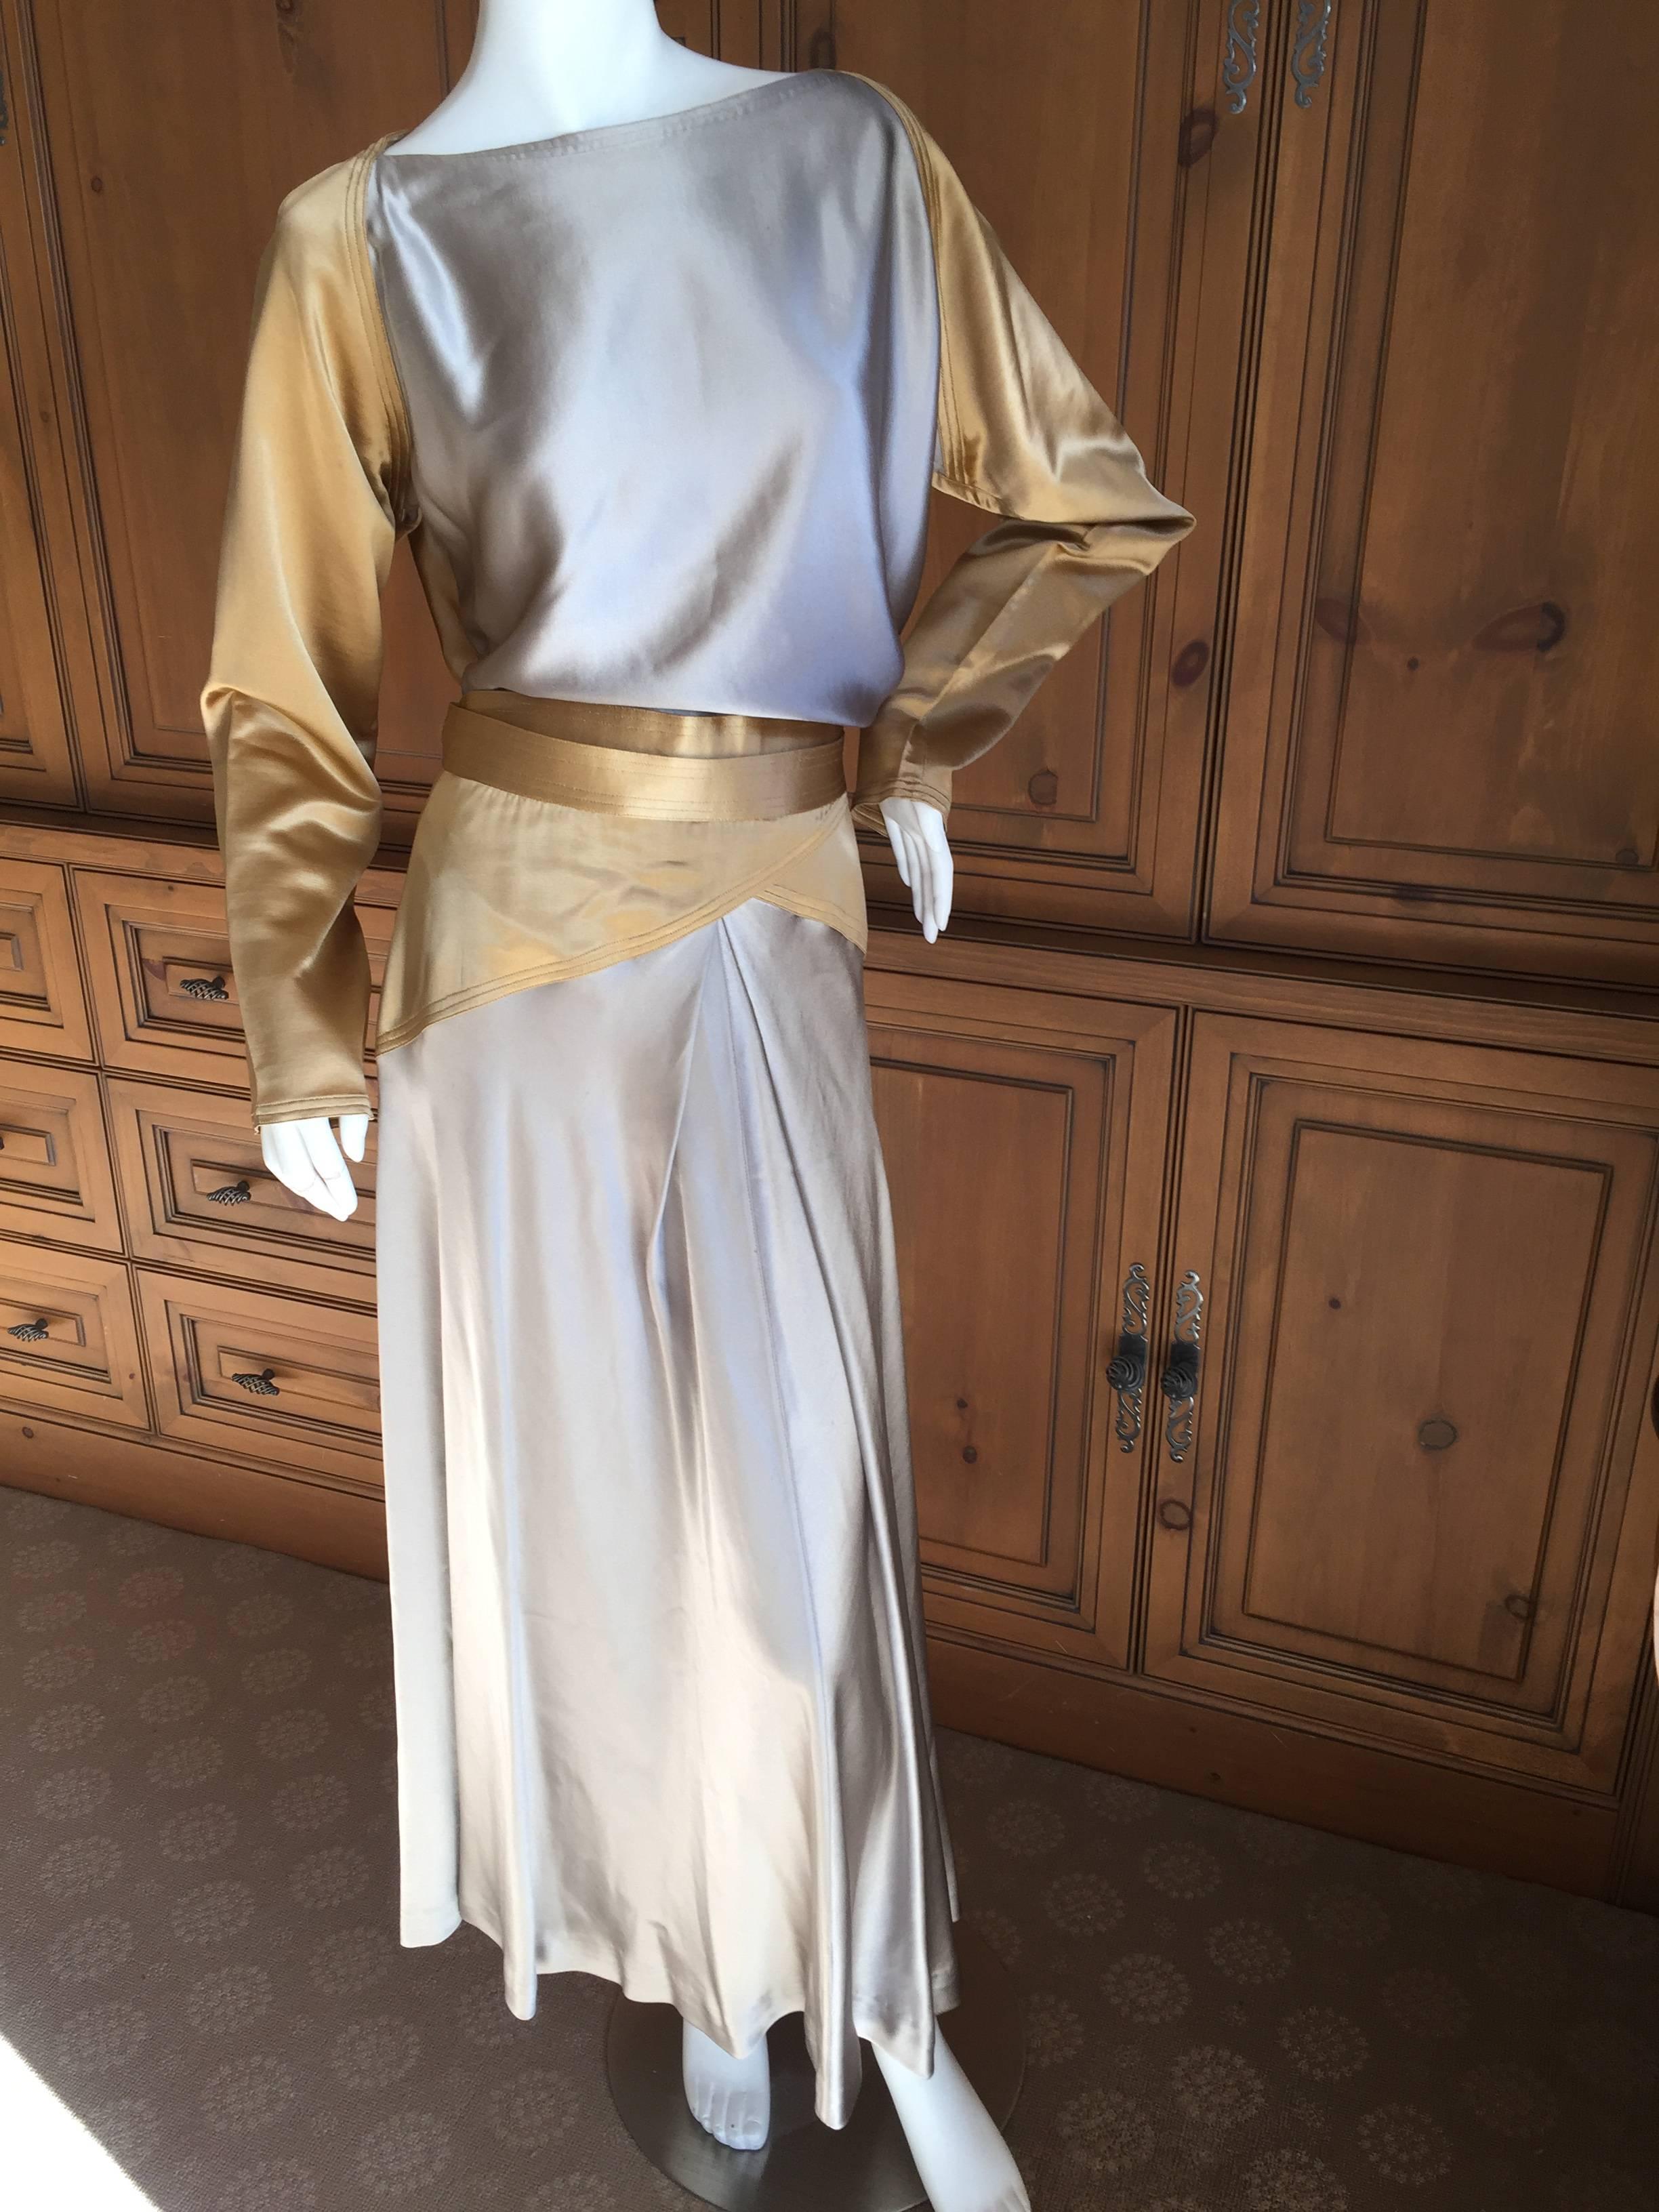 Geoffrey Beene silk charmeuse in wonderful shades of gold and silver.
Featuring a wrap skirt and a matching long sleeve top.
No size label , will fit sz 6-10
Bust 44